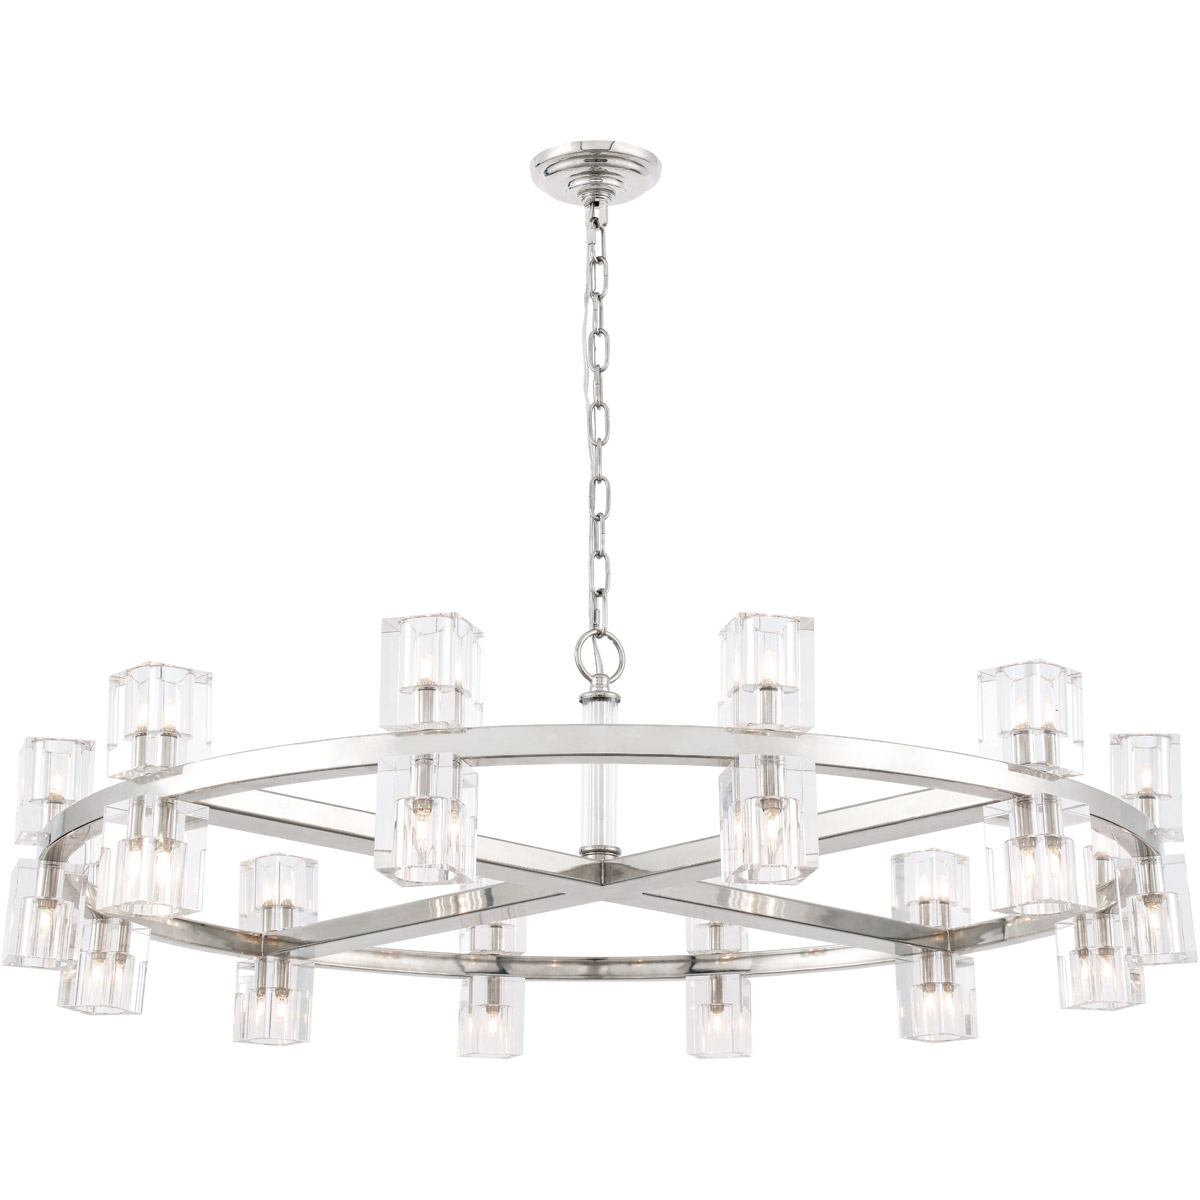 1550g42pn Chateau 20 Light Polished Nickel Ceiling Pendant